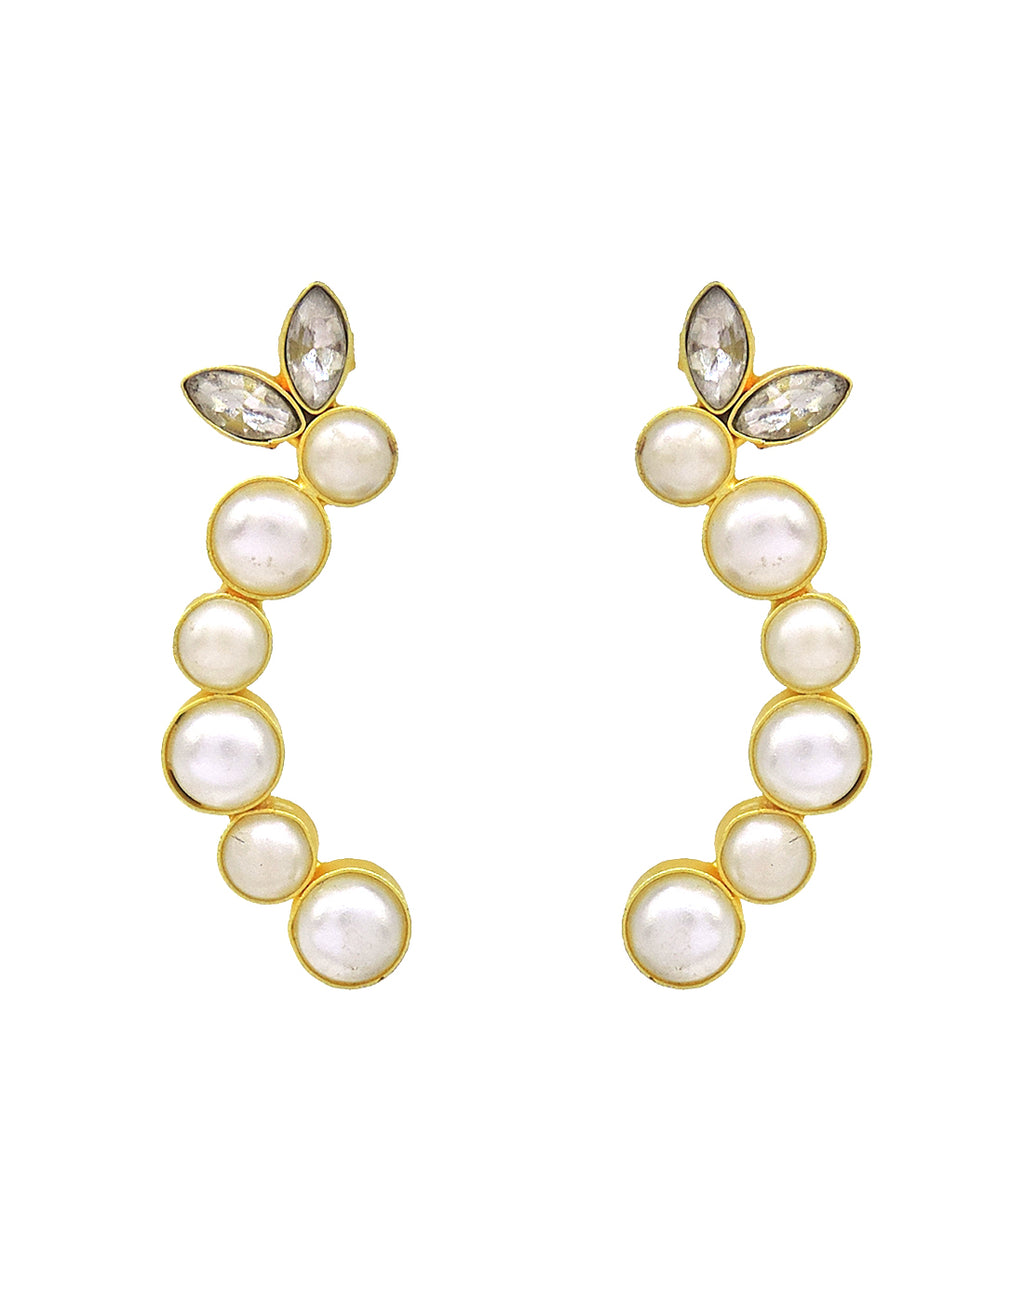 Curved Pearl Earrings - Statement Earrings - Gold-Plated & Hypoallergenic - Made in India - Dubai Jewellery - Dori